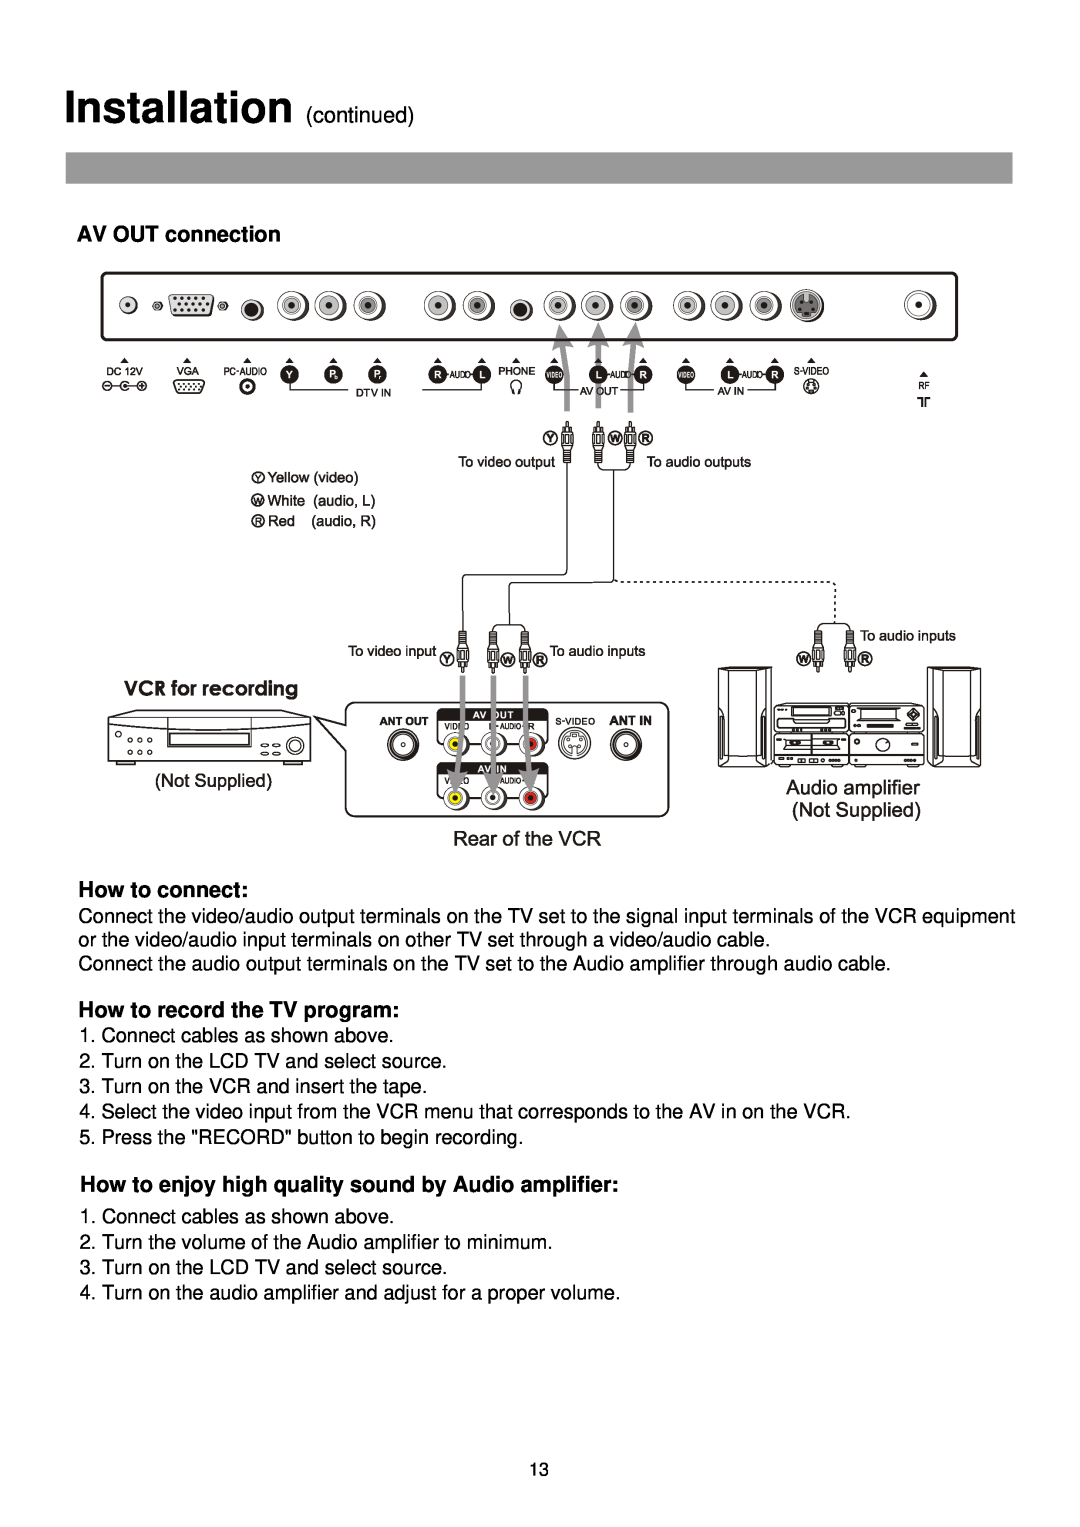 Palsonic TFTV515 owner manual Installation continued, AV OUT connection How to connect, How to record the TV program 